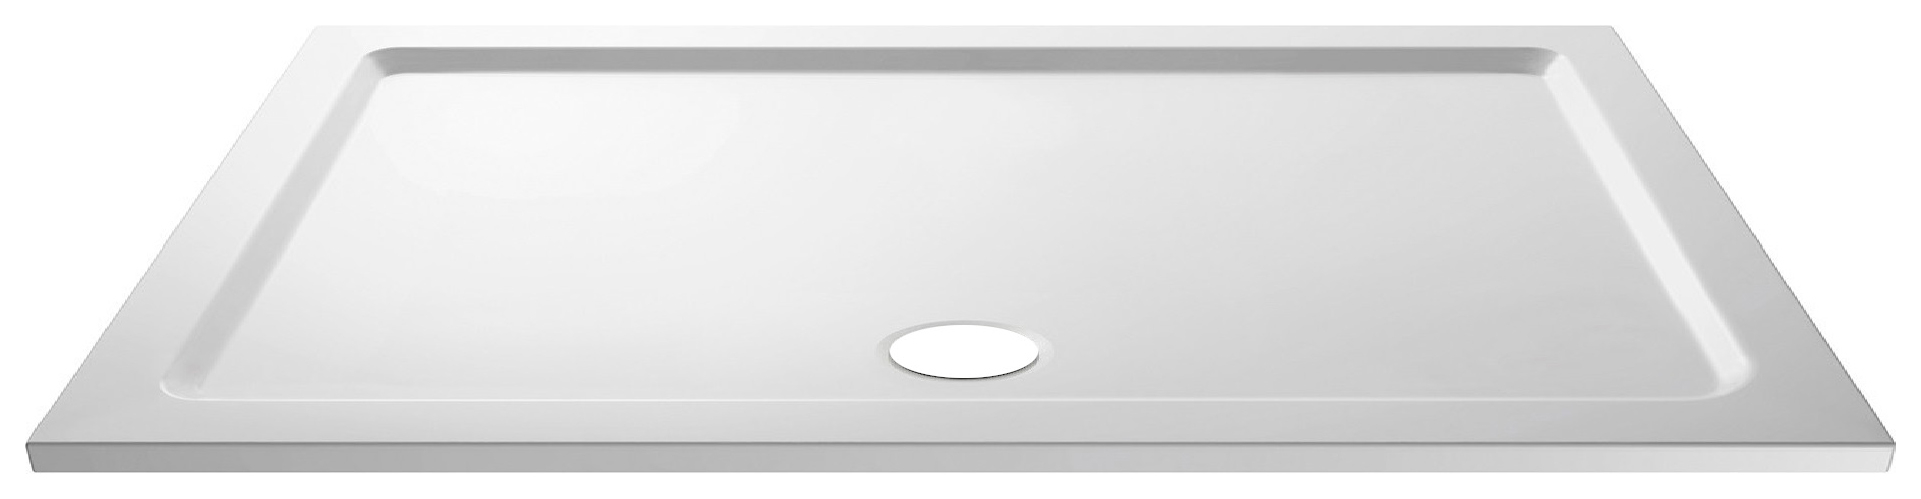 Image of Wickes 40mm Pearlstone Rectangular Shower Tray - 1700 x 760mm